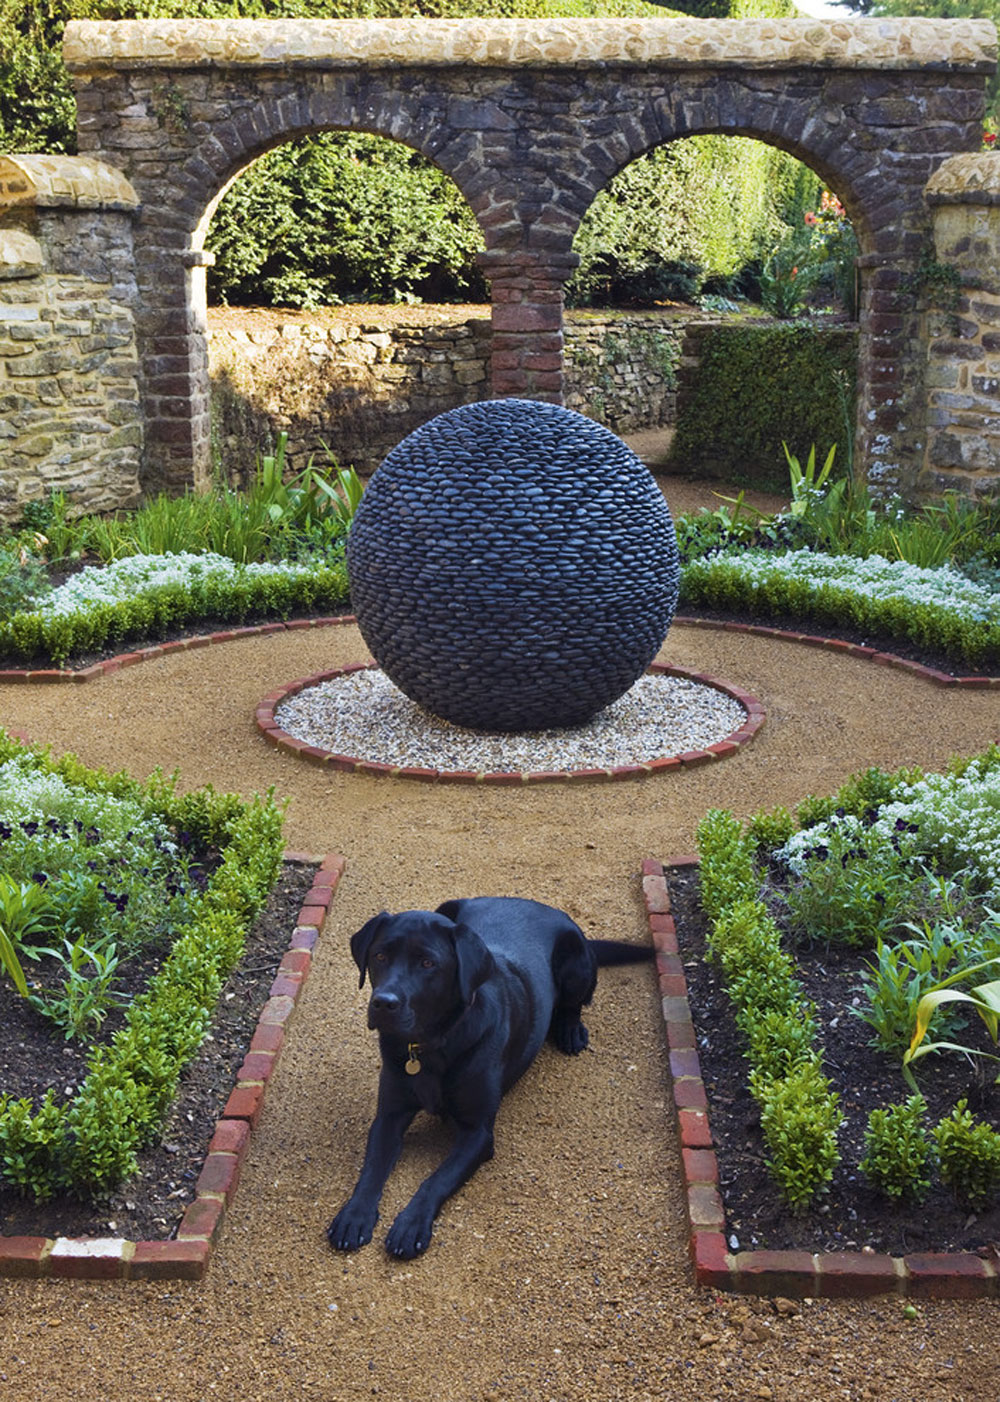 Dark-Planet-garden-sculpture-in-traditional-style-courtyard-by-David-Harber Landscaping rocks to create the perfect rock garden design